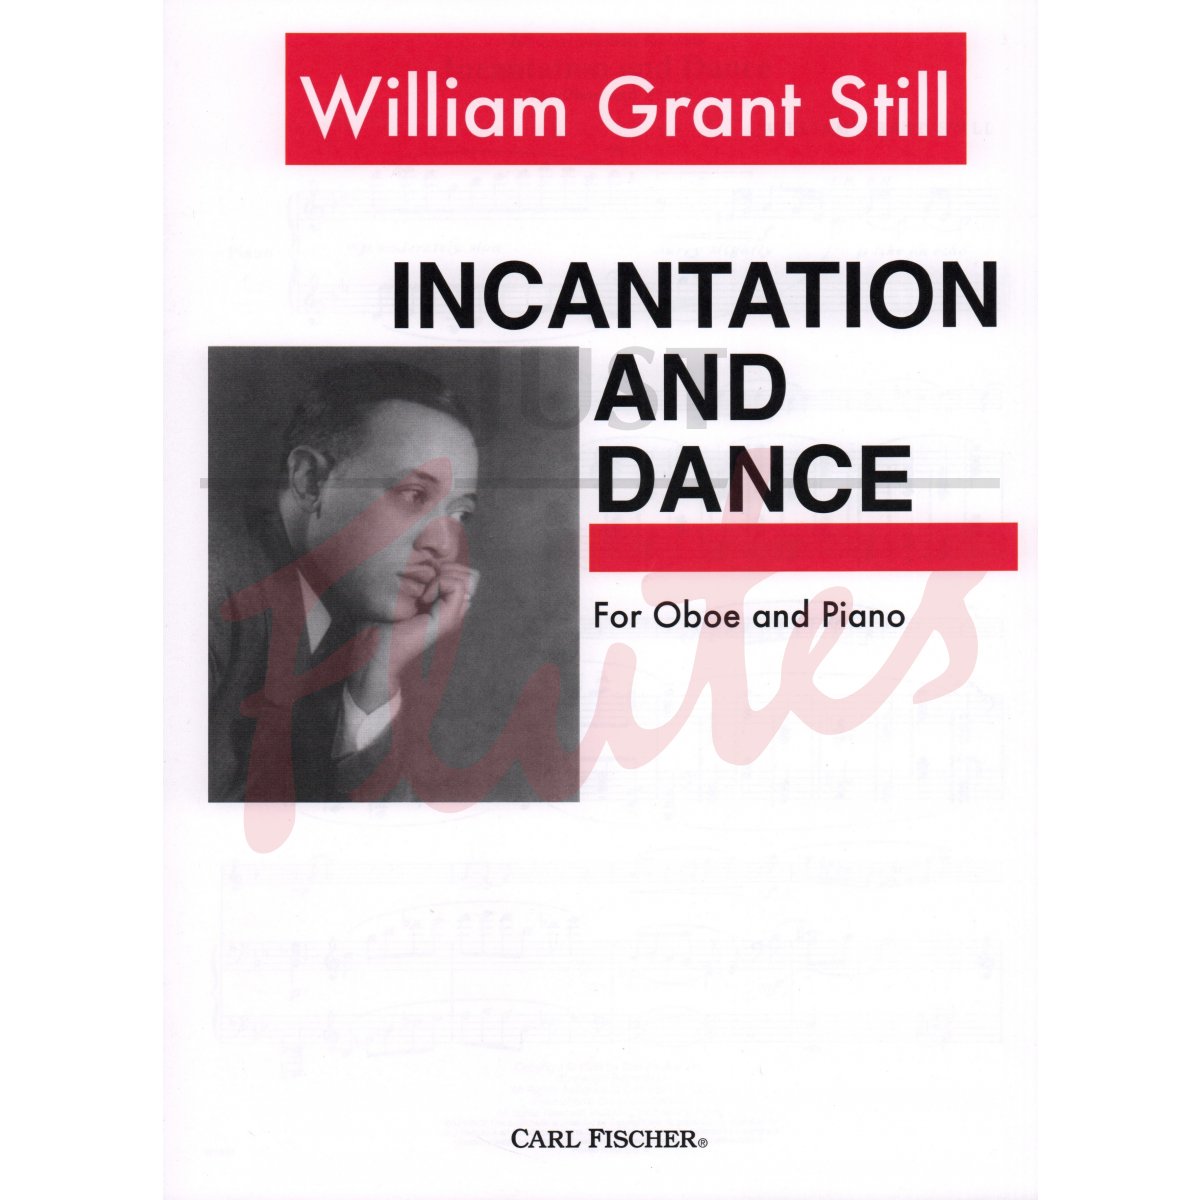 Incantation and Dance for Oboe and Piano